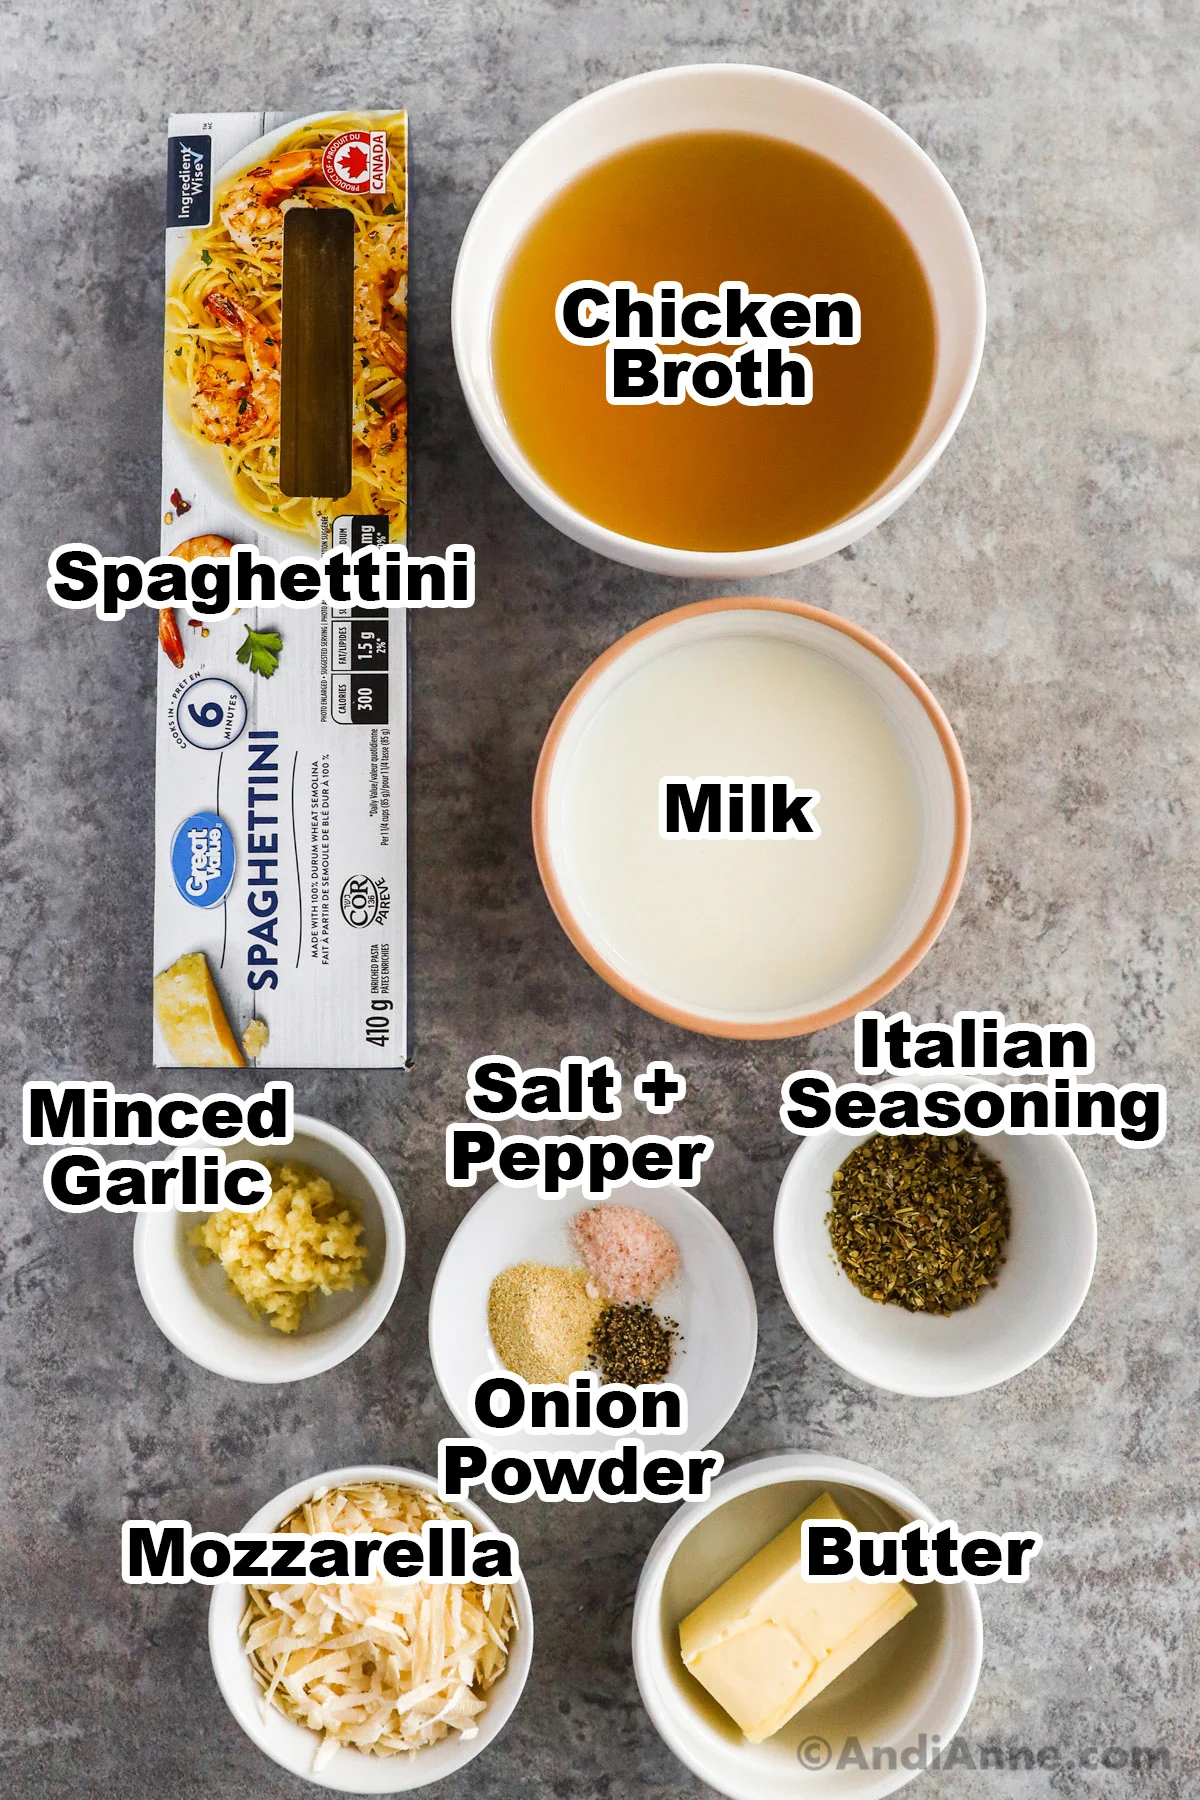 Recipe ingredients on counter including box of spaghettini, bowls of chicken broth, milk, minced garlic, italian seasoning, spices, butter and parmesan cheese.